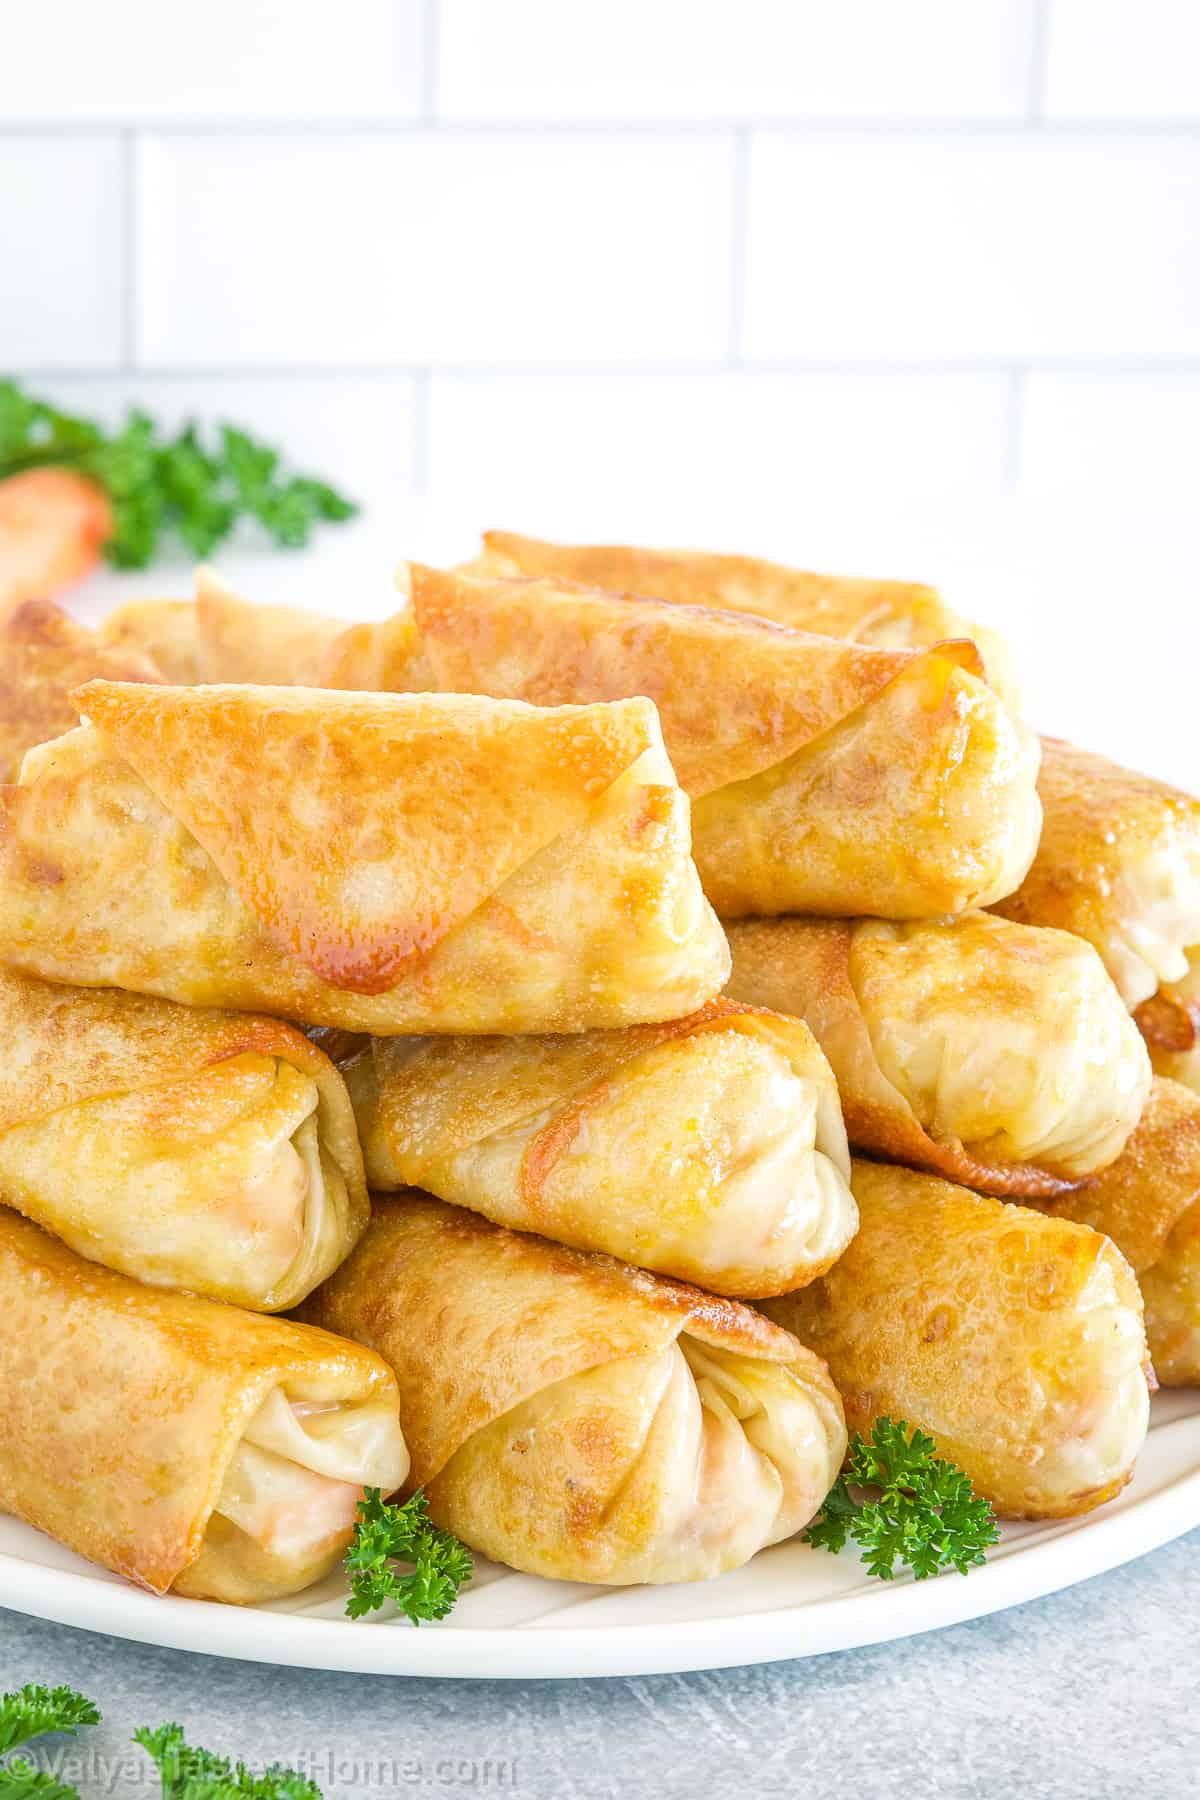 These Homemade Egg Rolls are a delightful treat made by wrapping a savory ground meat and vegetable filling into a thin, crispy pastry and frying it until it reaches golden perfection. 